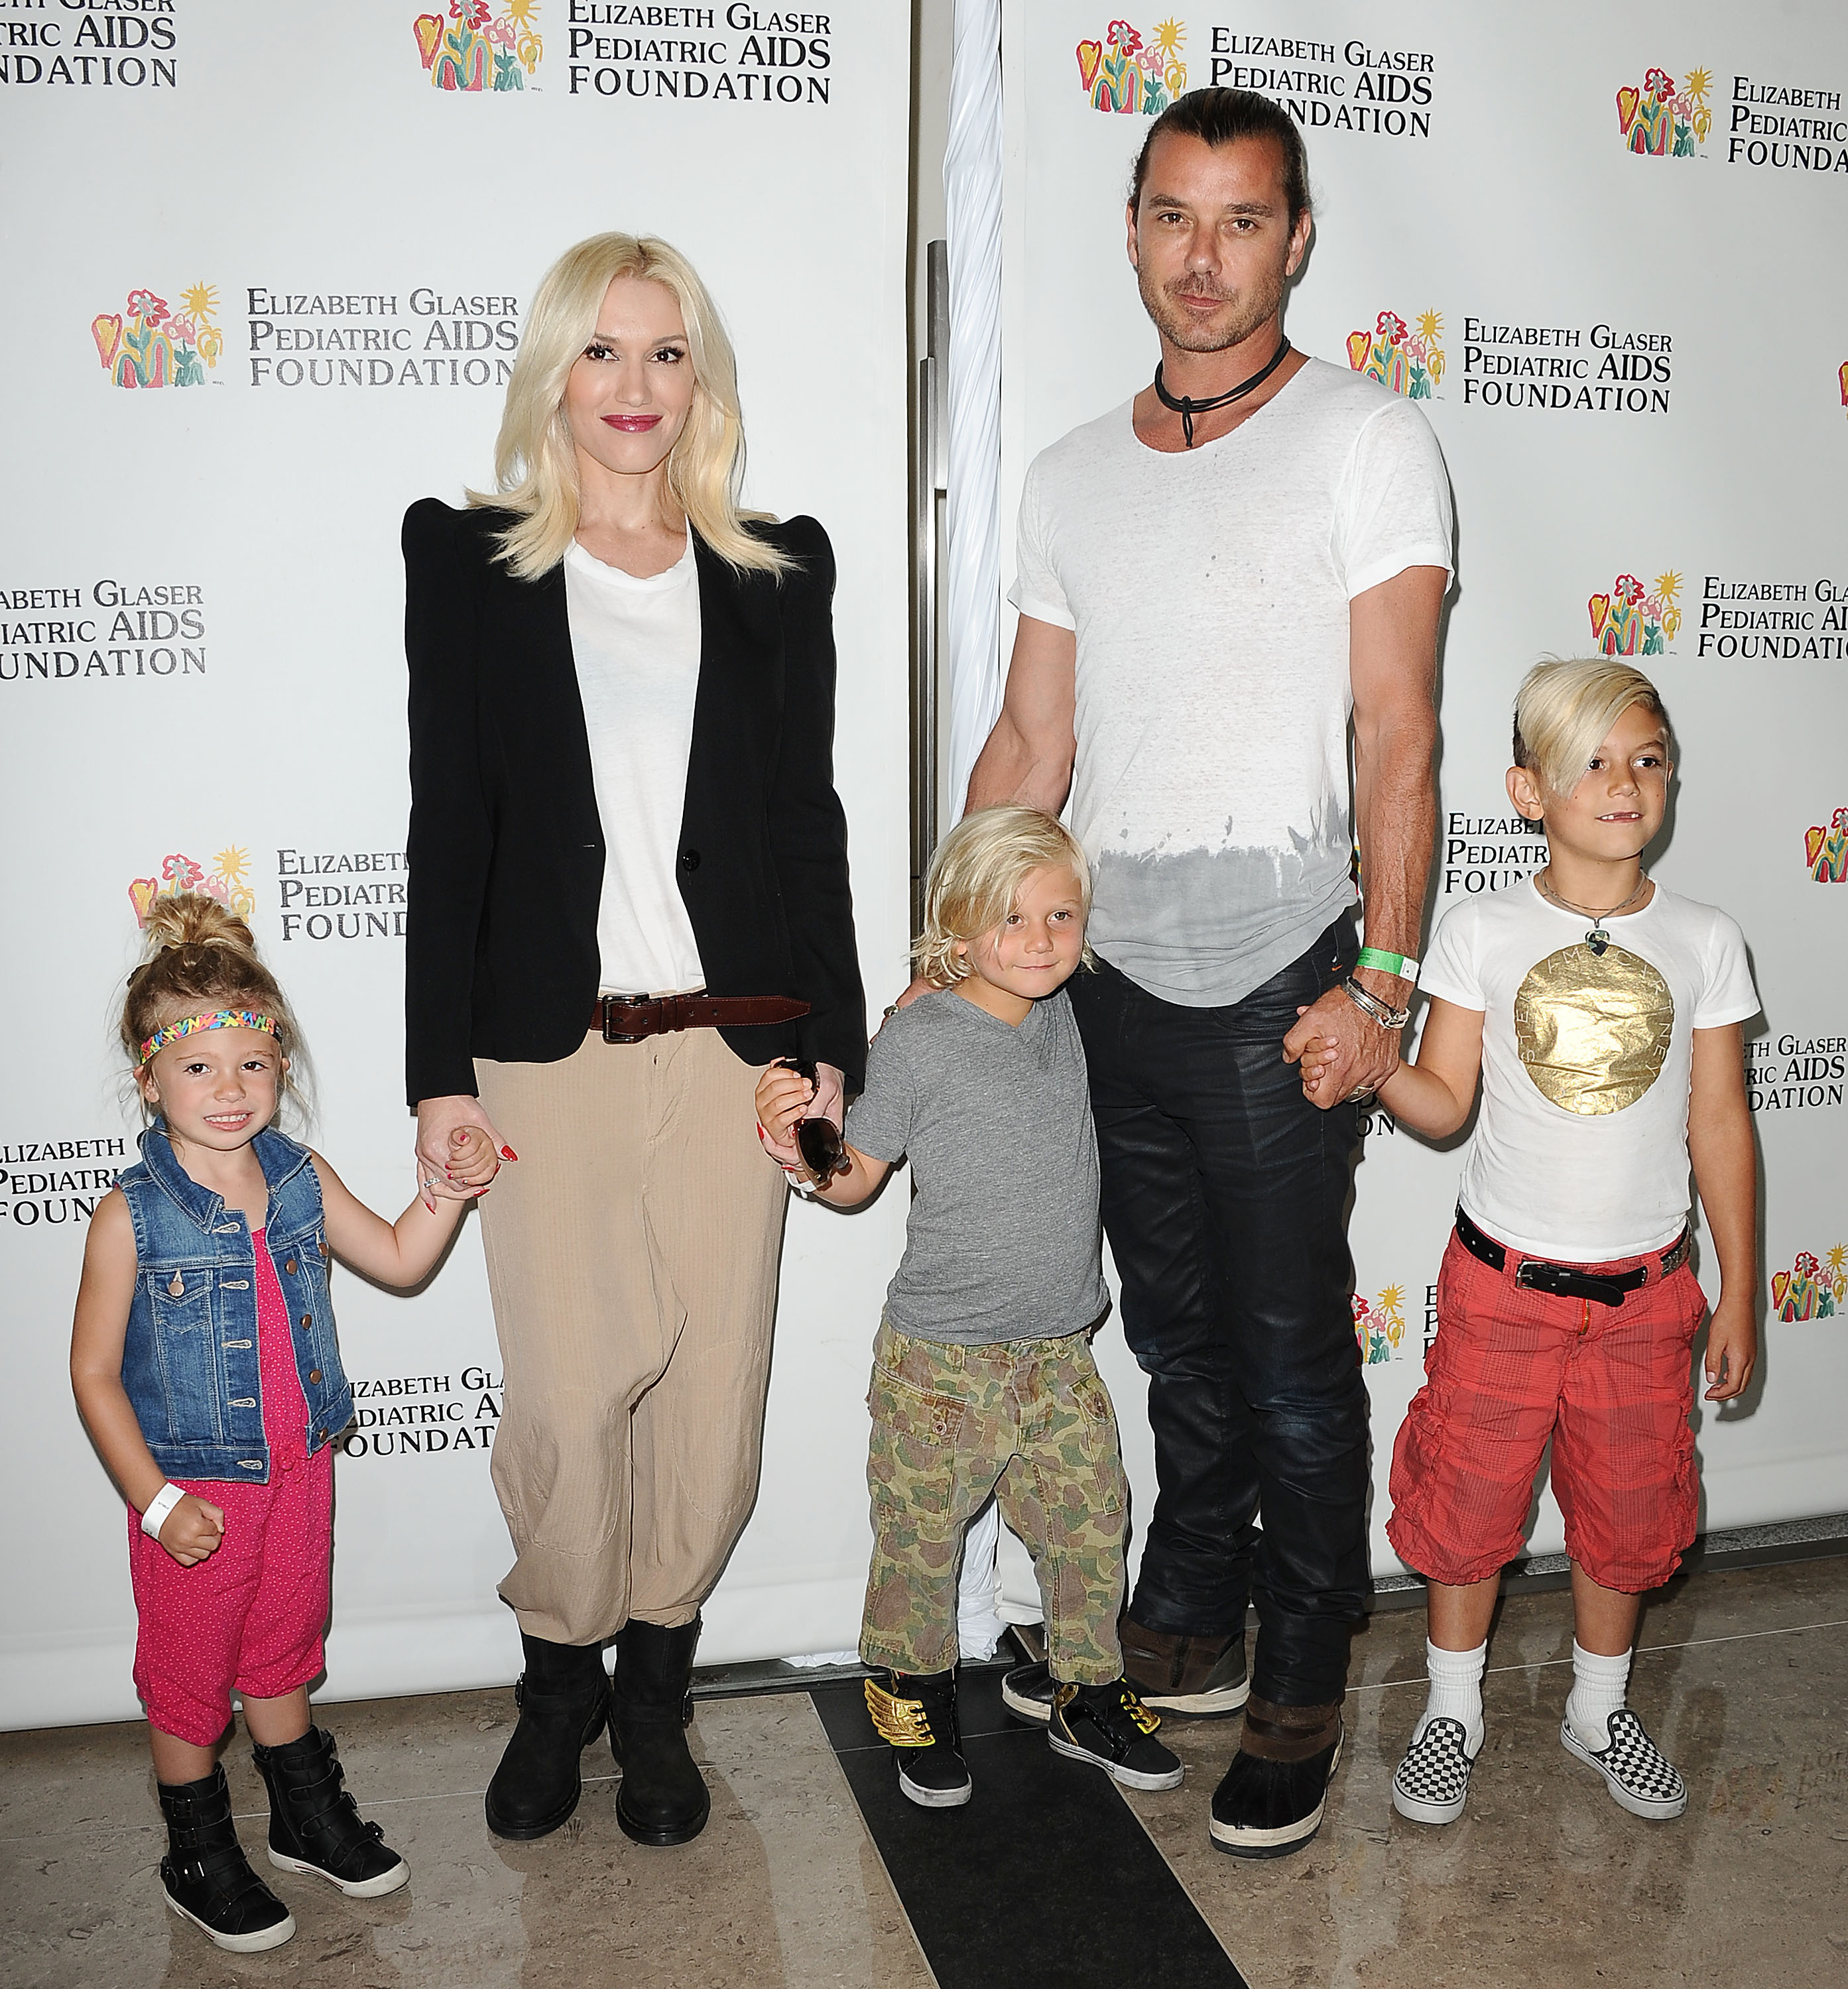 Gwen Stefani and Gavin Rossdale with their children, Kingston, Zuma, and Apollo, in Los Angeles in 2013 | Source: Getty Images